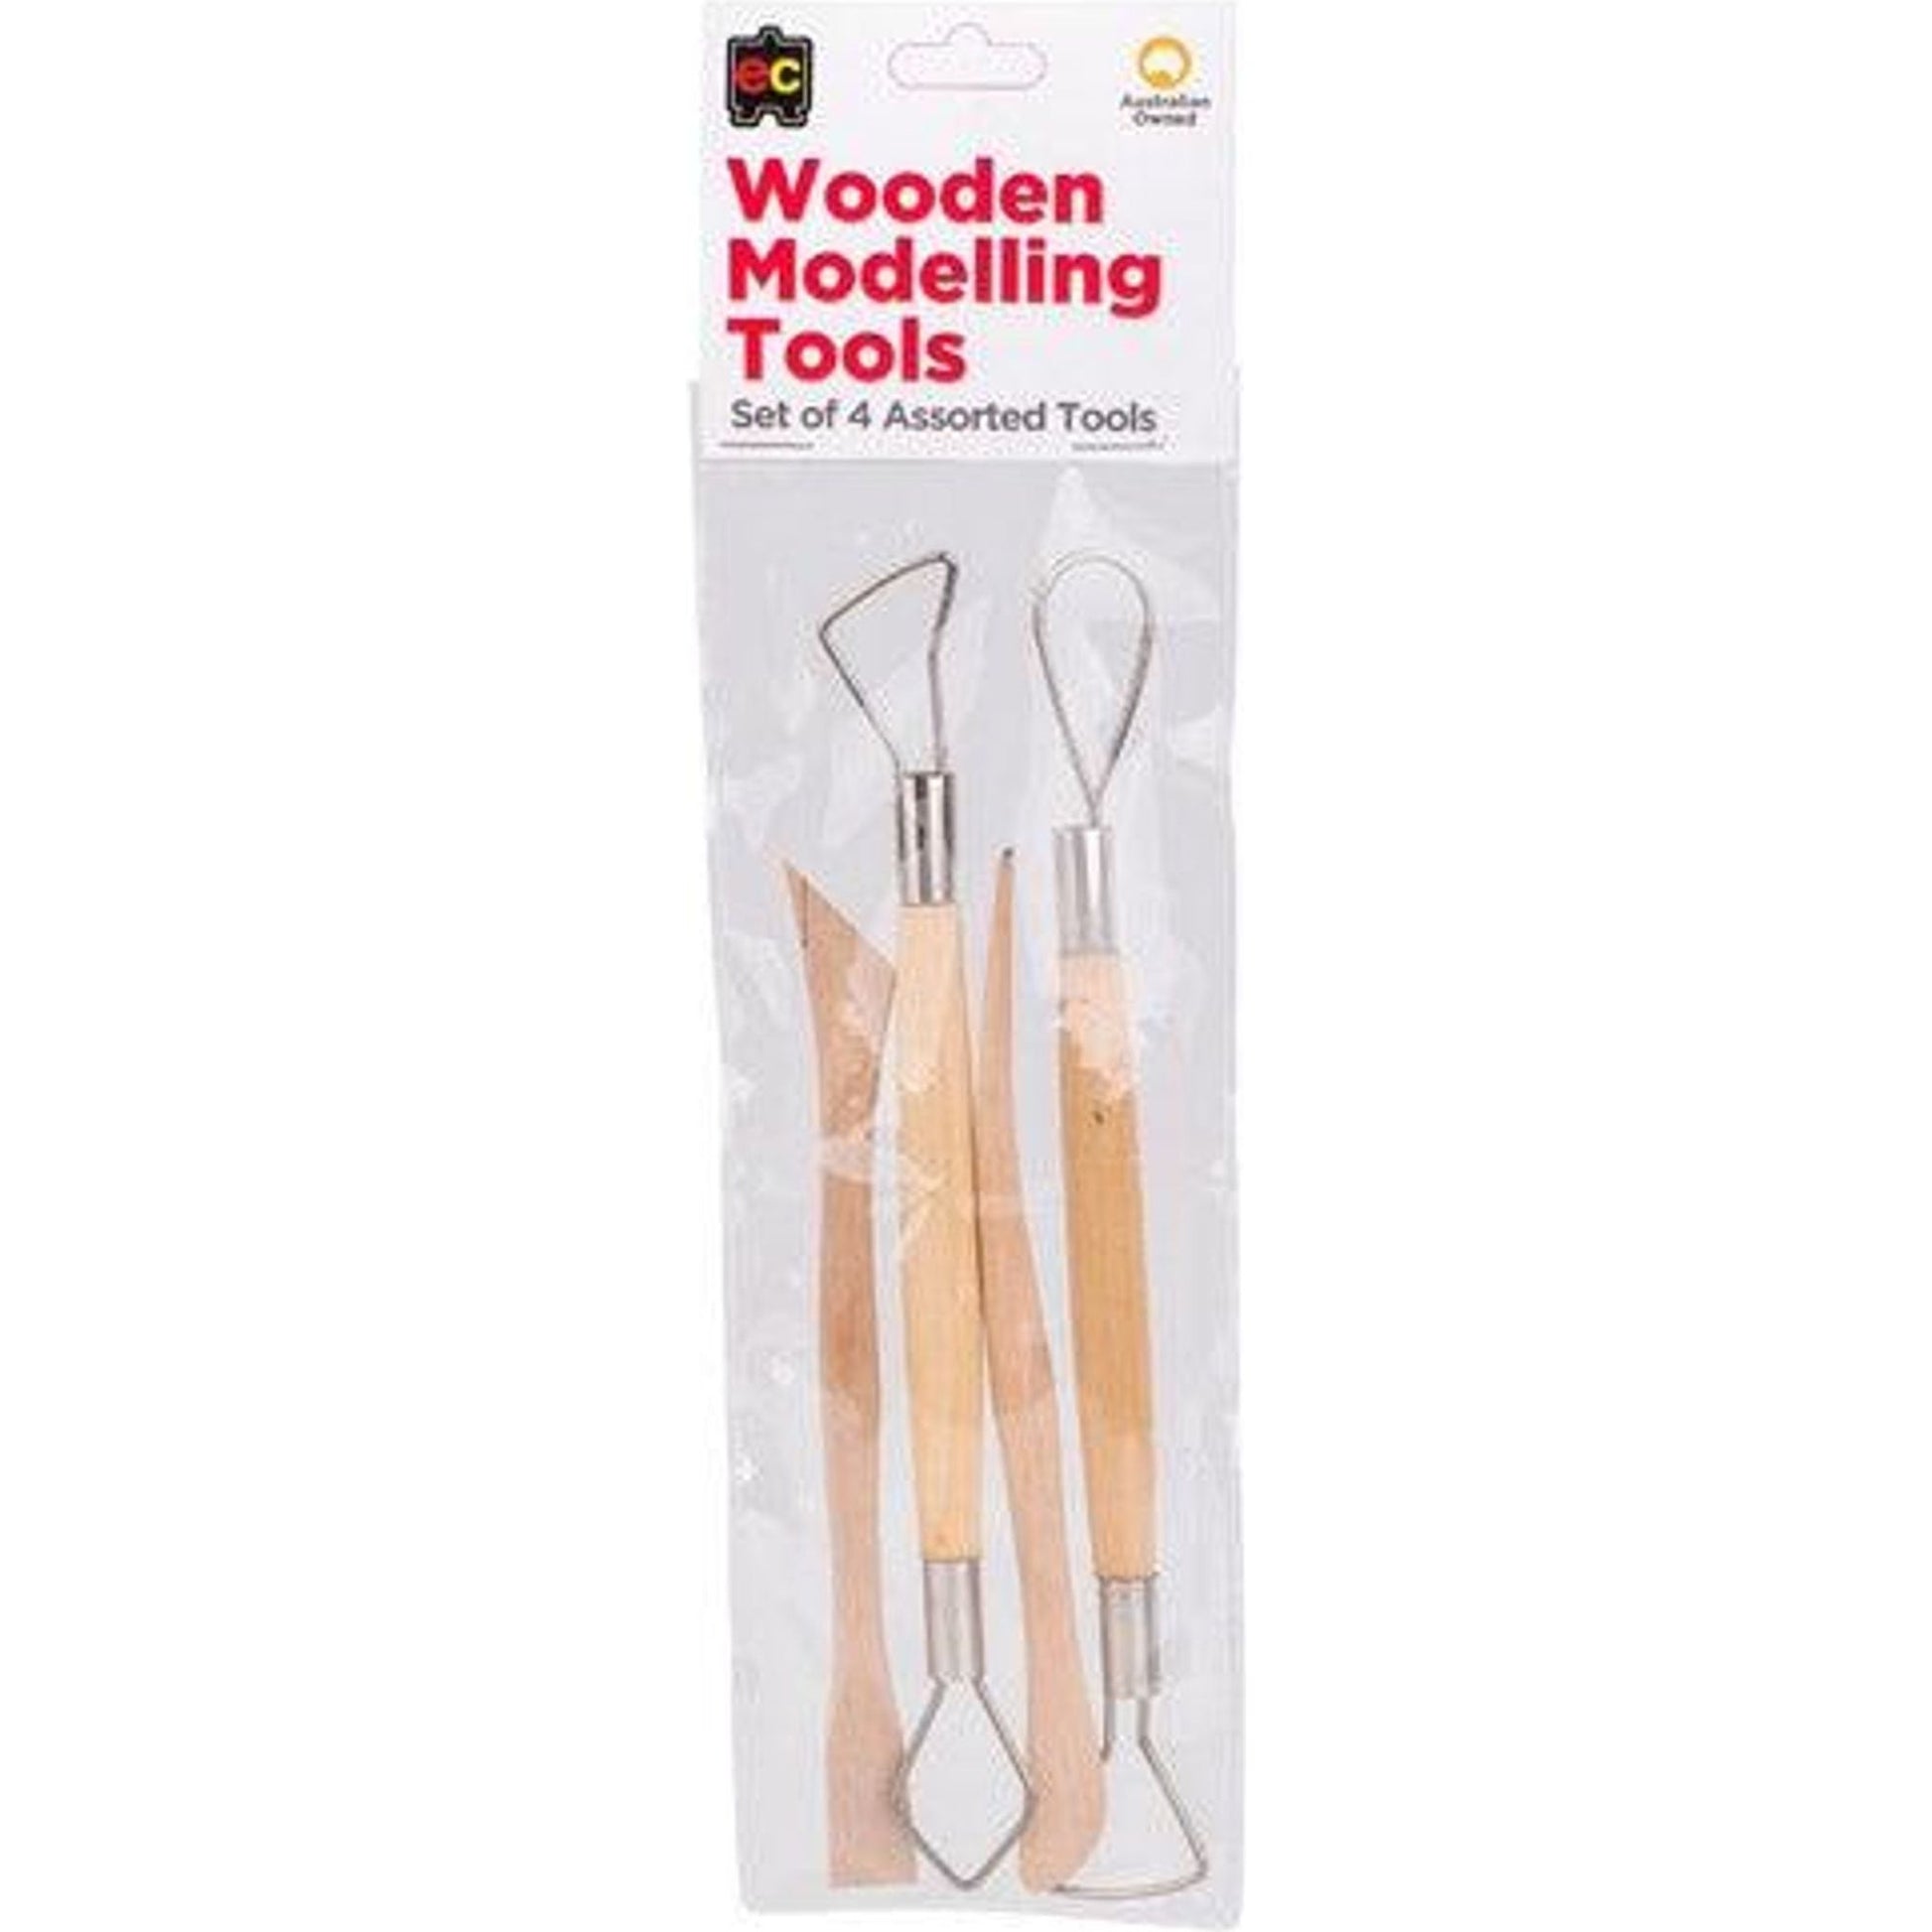 Wooden Modelling Tools - Set of 4 - Toybox Tales